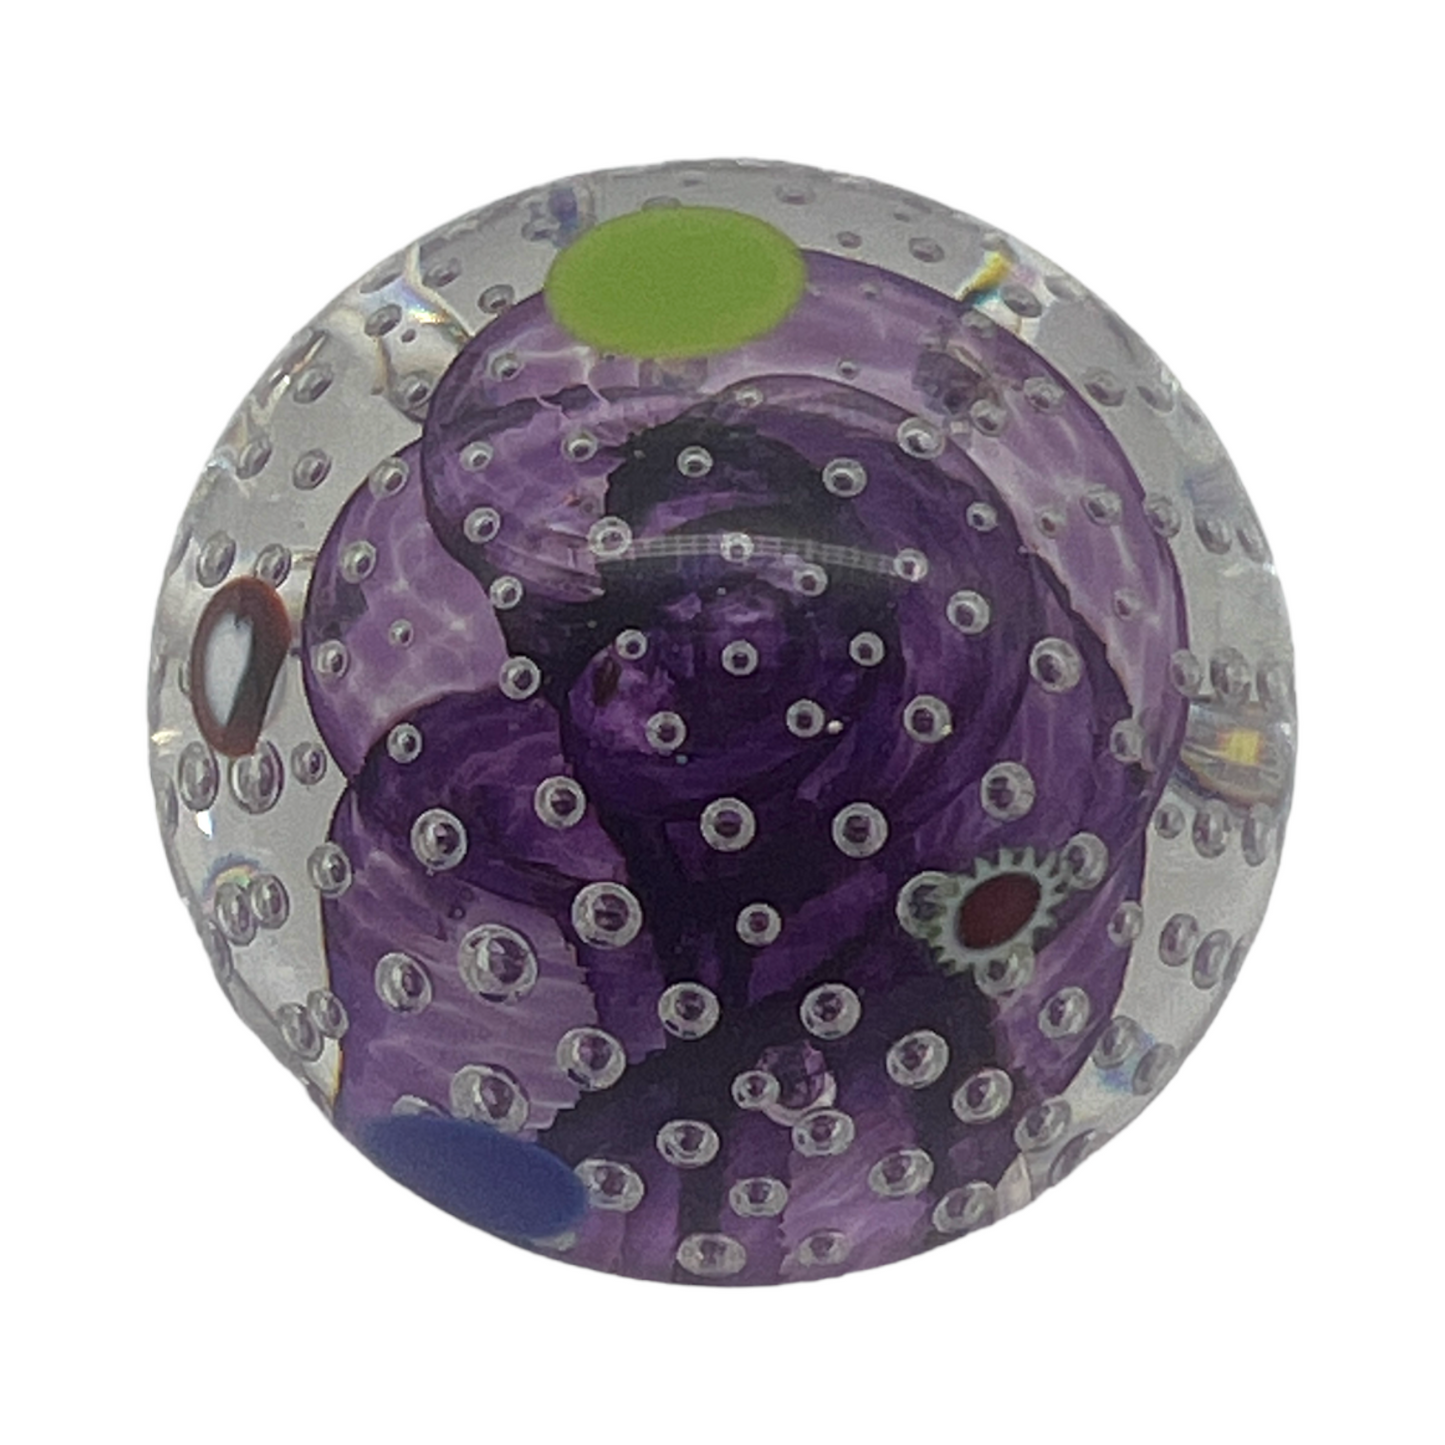 Glass Eye Studio Paperweight - Millefiori With Controlled Bubble - Signed GES 99 - 2"